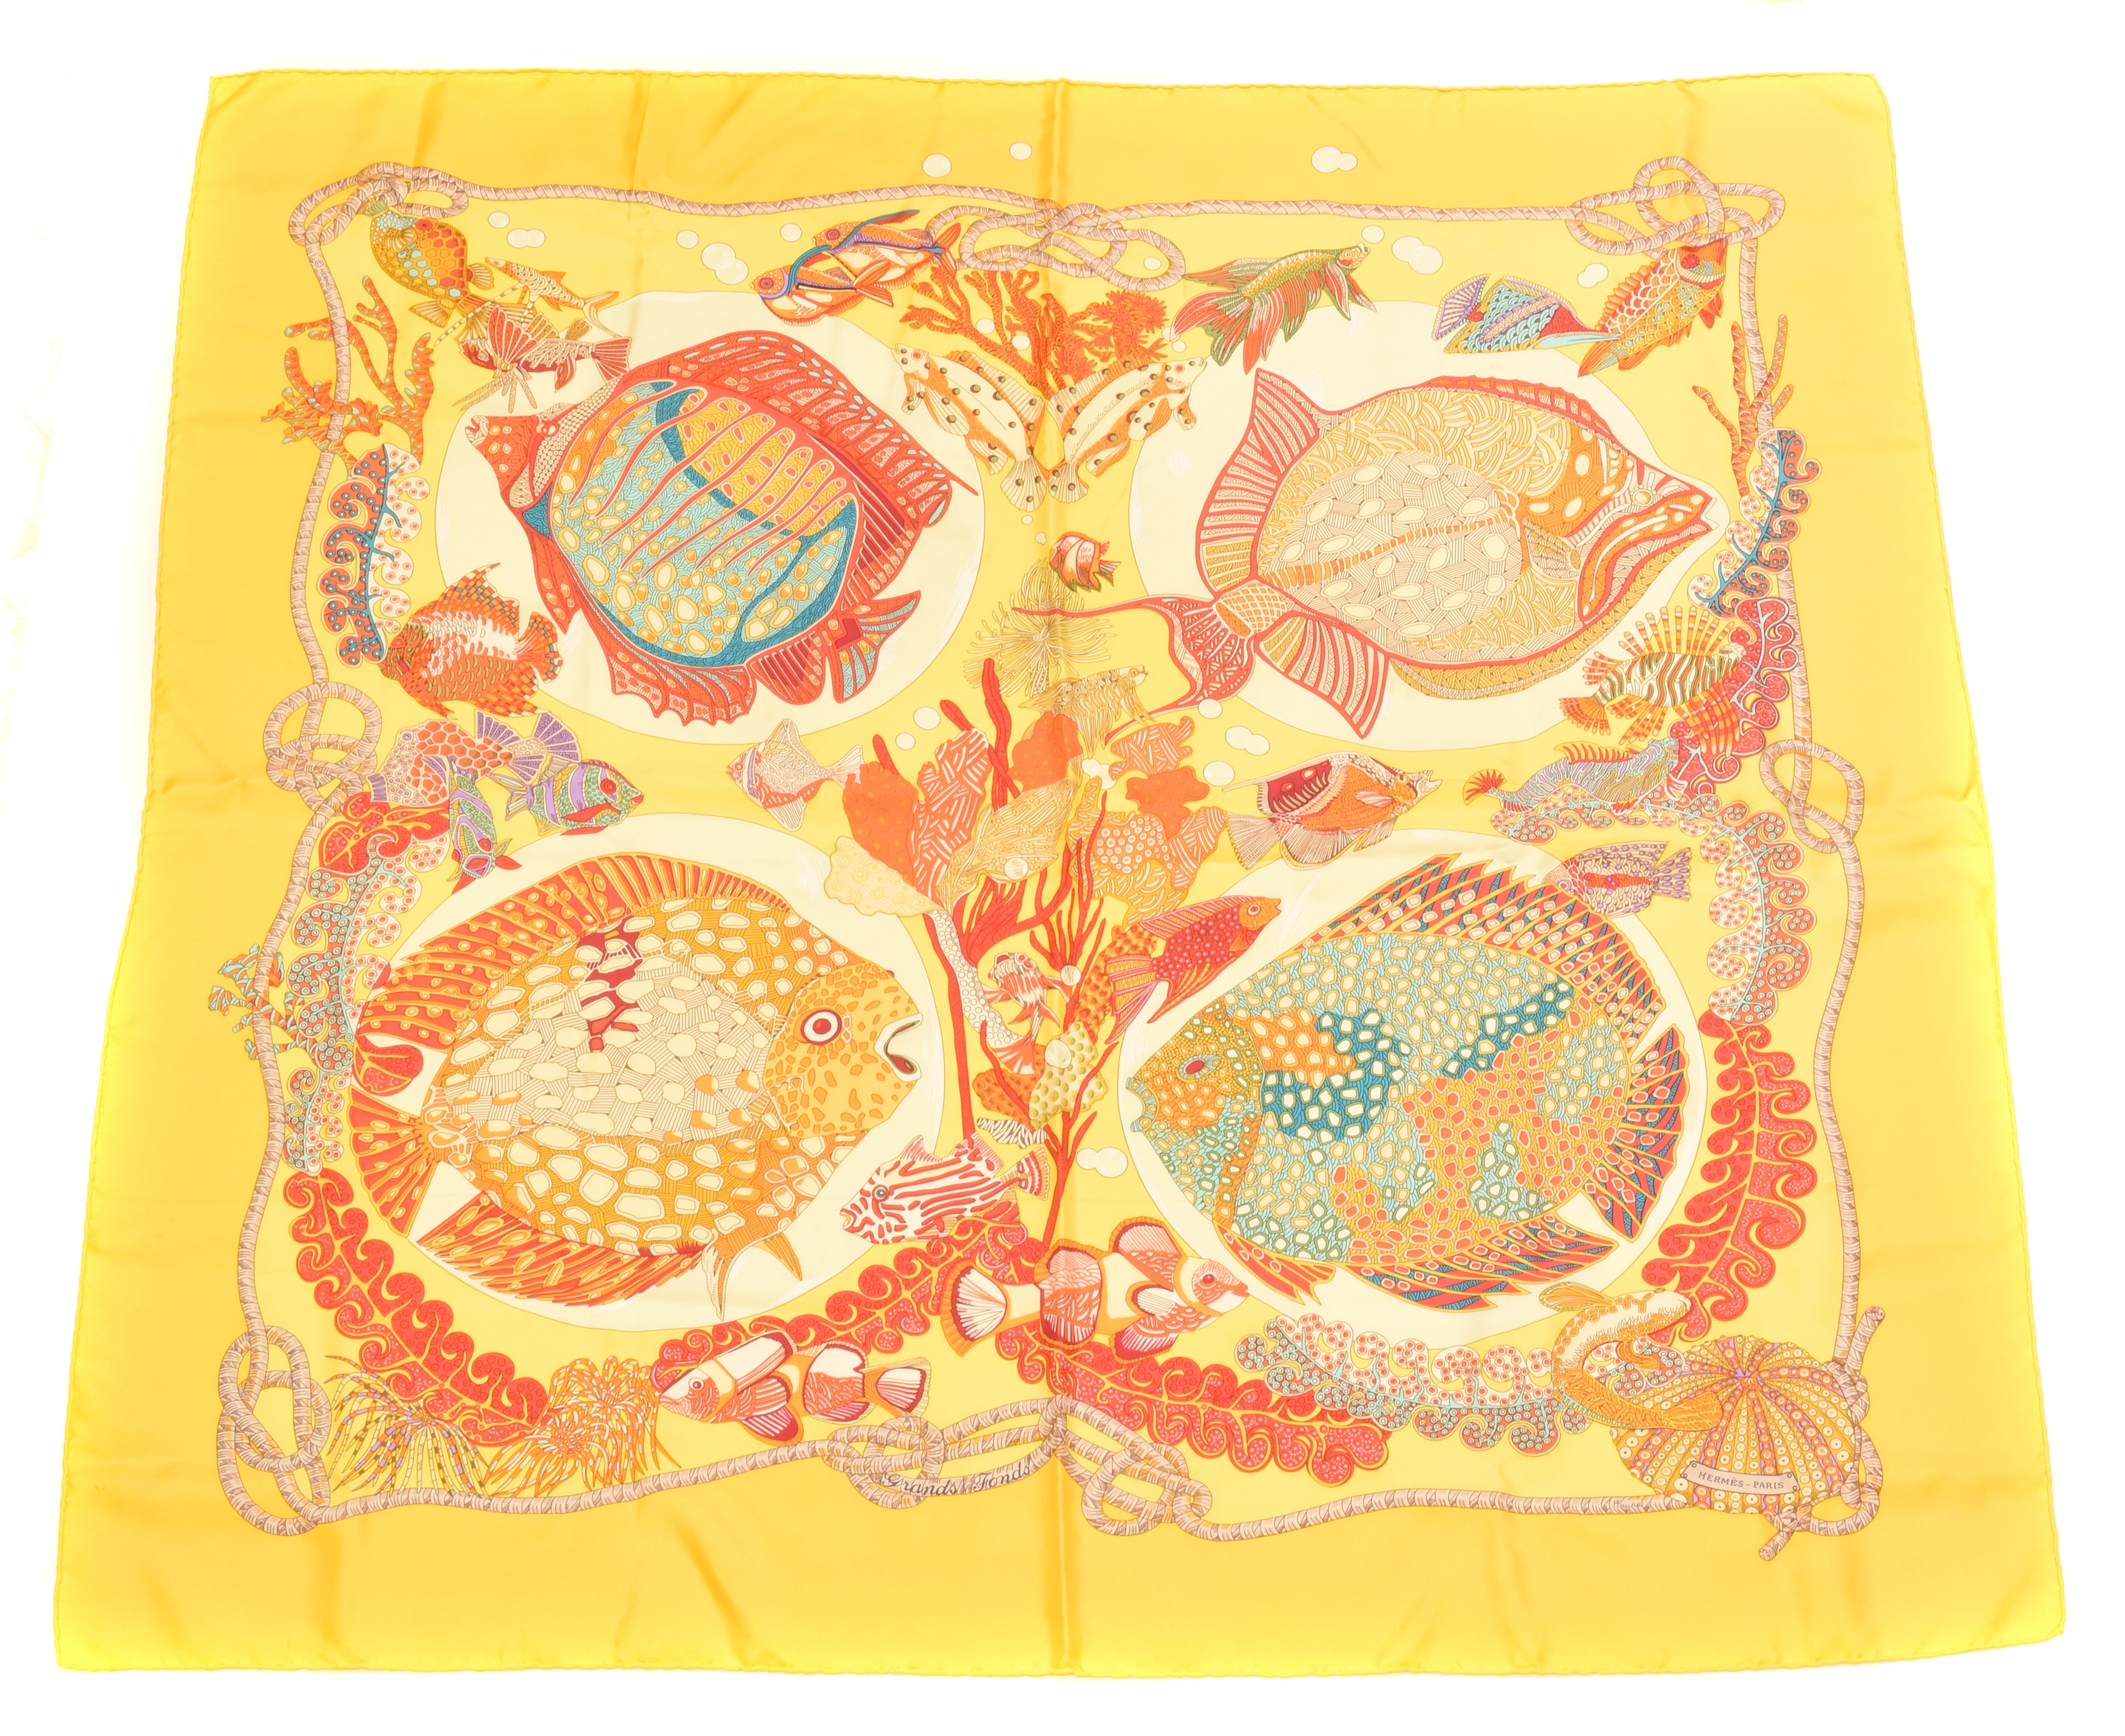 A Hermès "Grand Fonds" silk scarf by Annie Faivre, circa 1992, the yellow, orange, blue and purple pattern depicting exotic fish, signed Hermès. With maker's box.